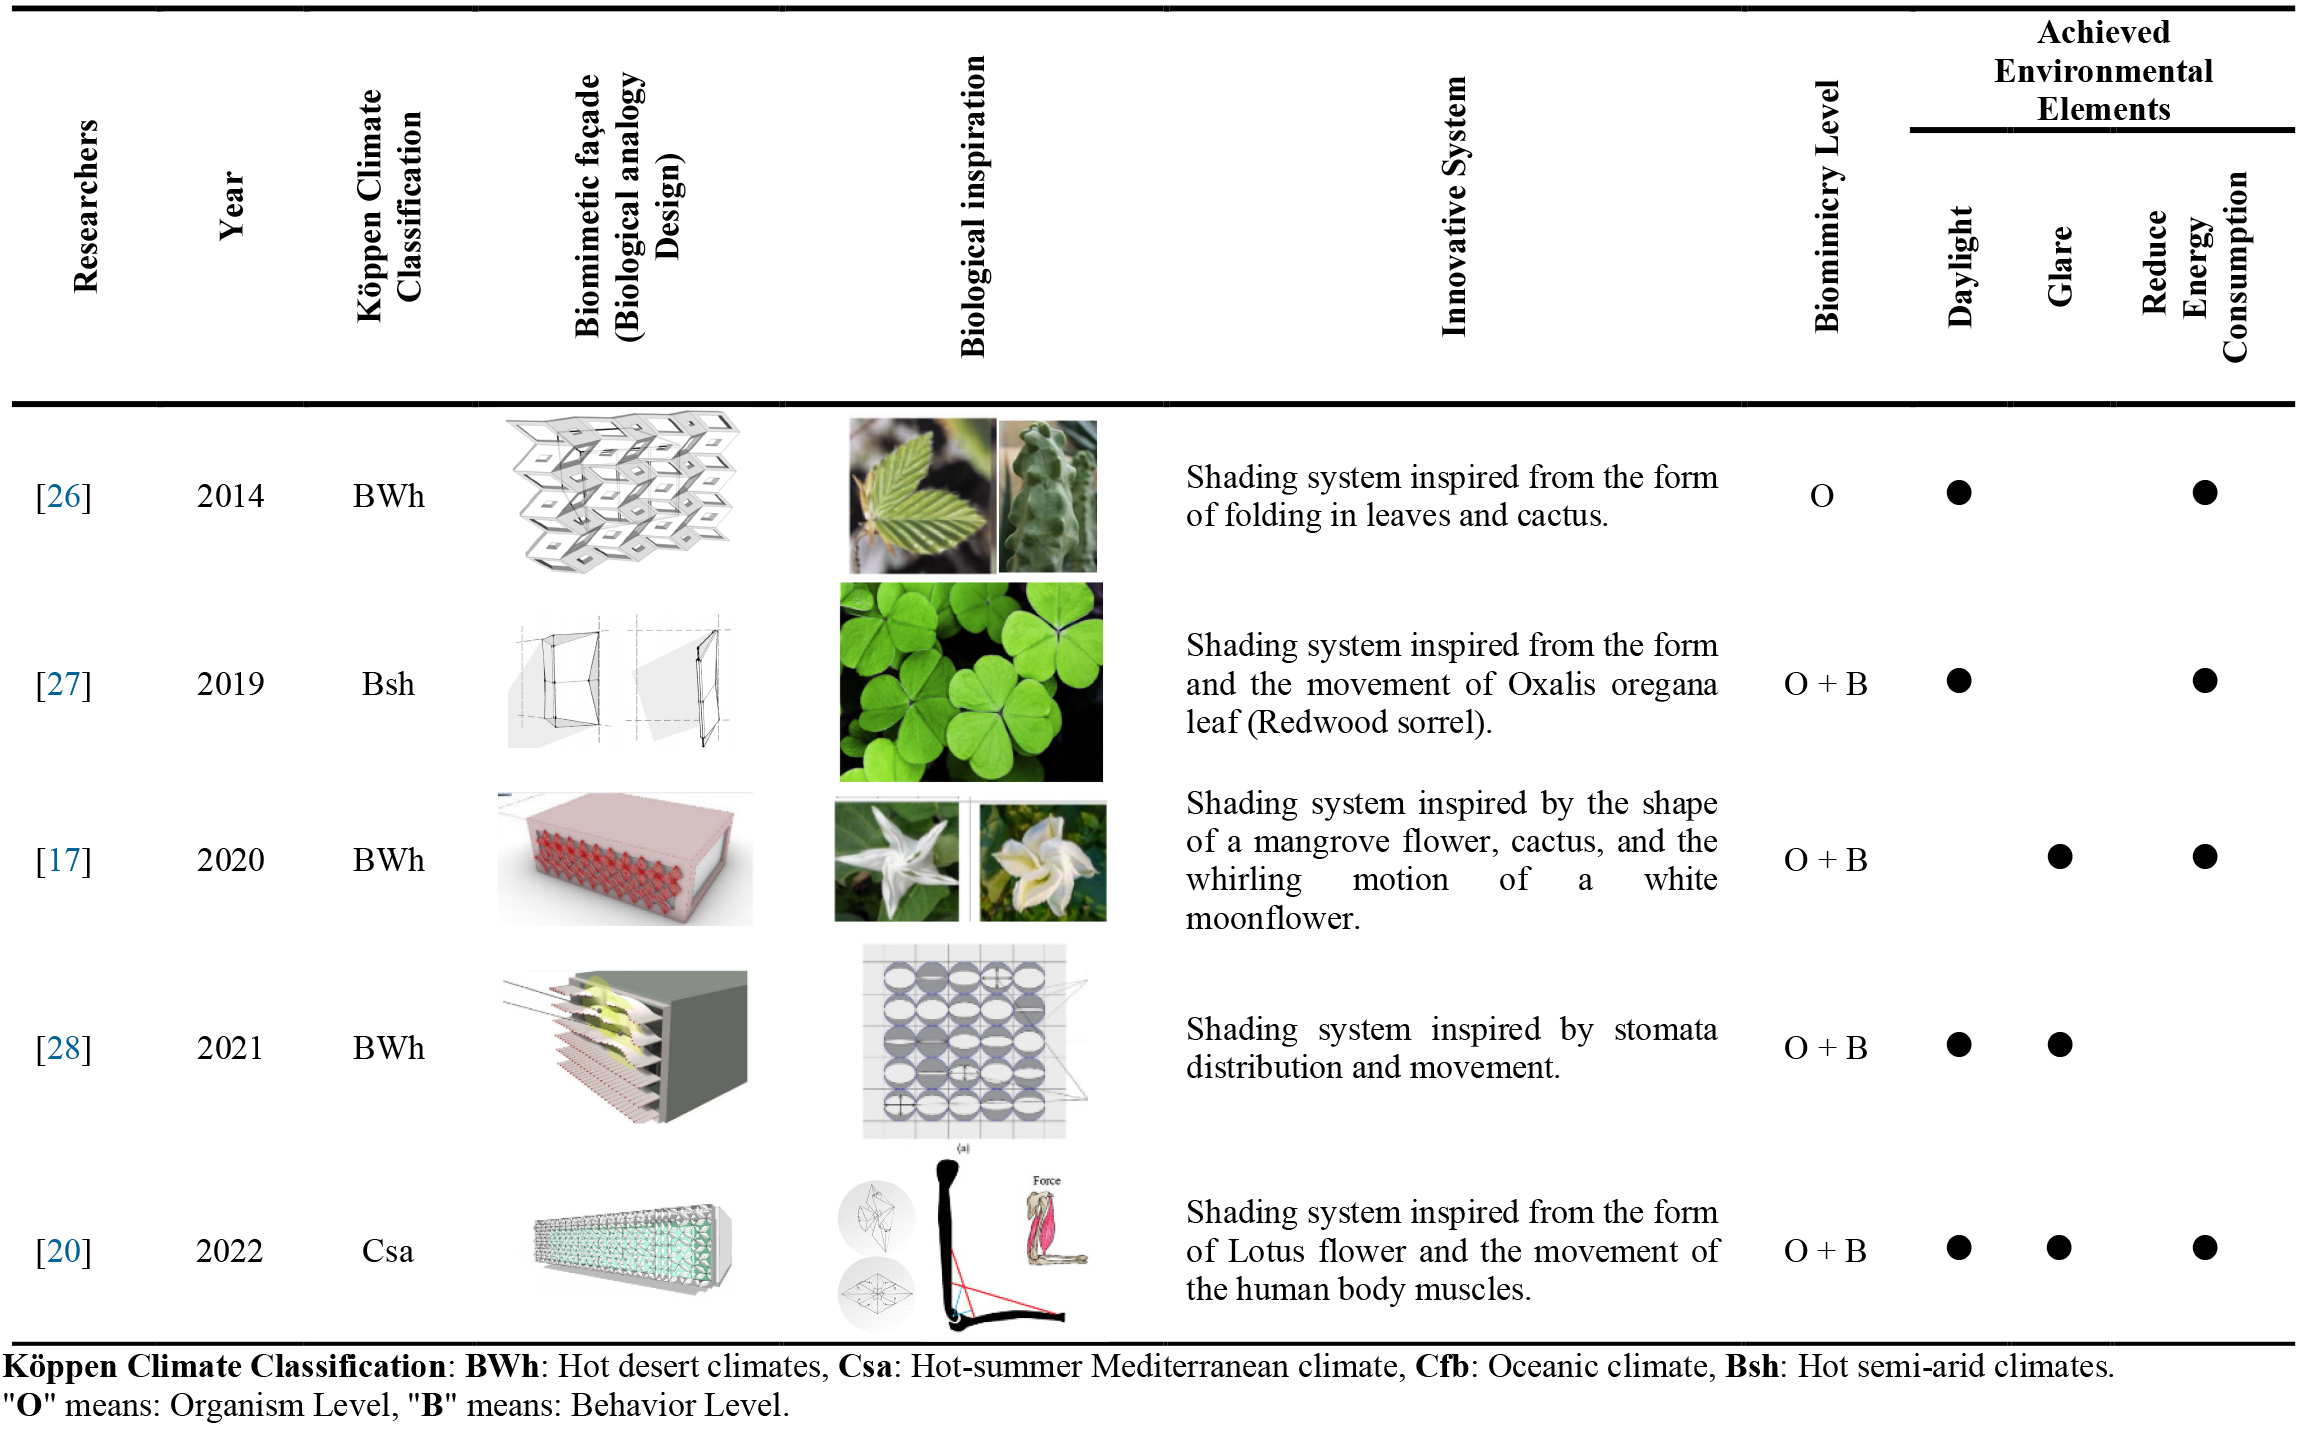 Studies of biomimetic inspired building skins for office buildings in different climatic regions [17,20,26-28].